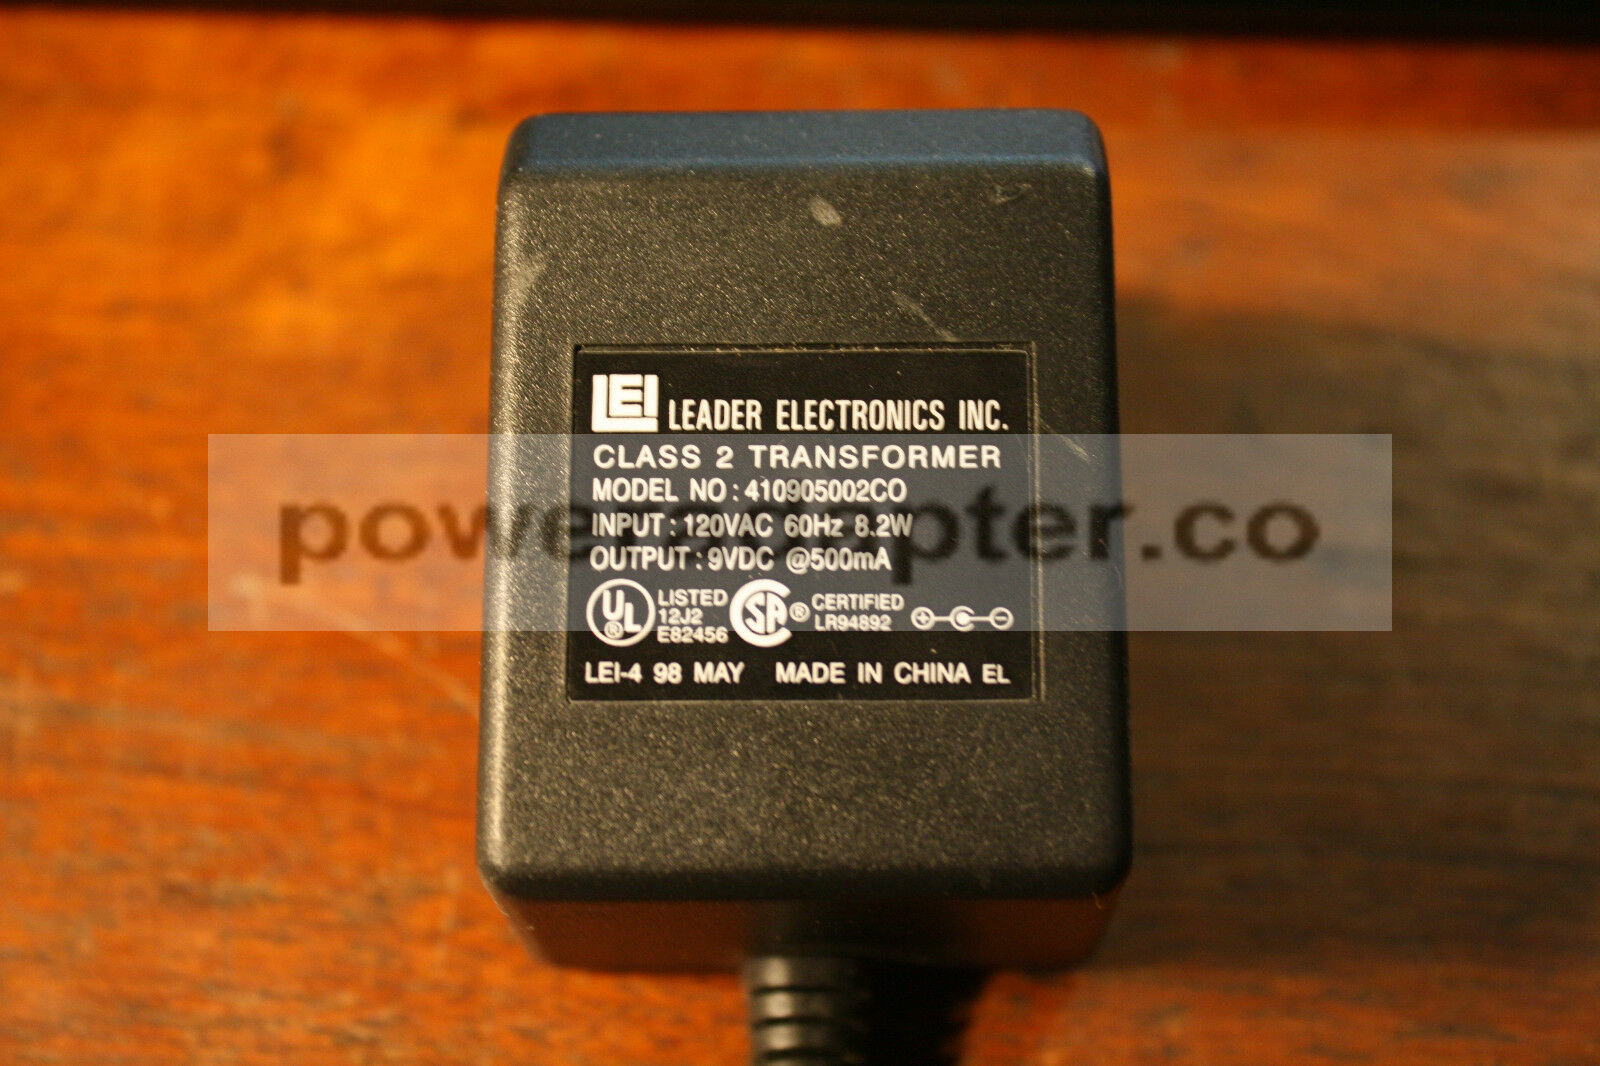 Leader Electronics 410905002CO 9vdc 500mA AC Adapter Condition: Used: An item that has been used previously. The ite